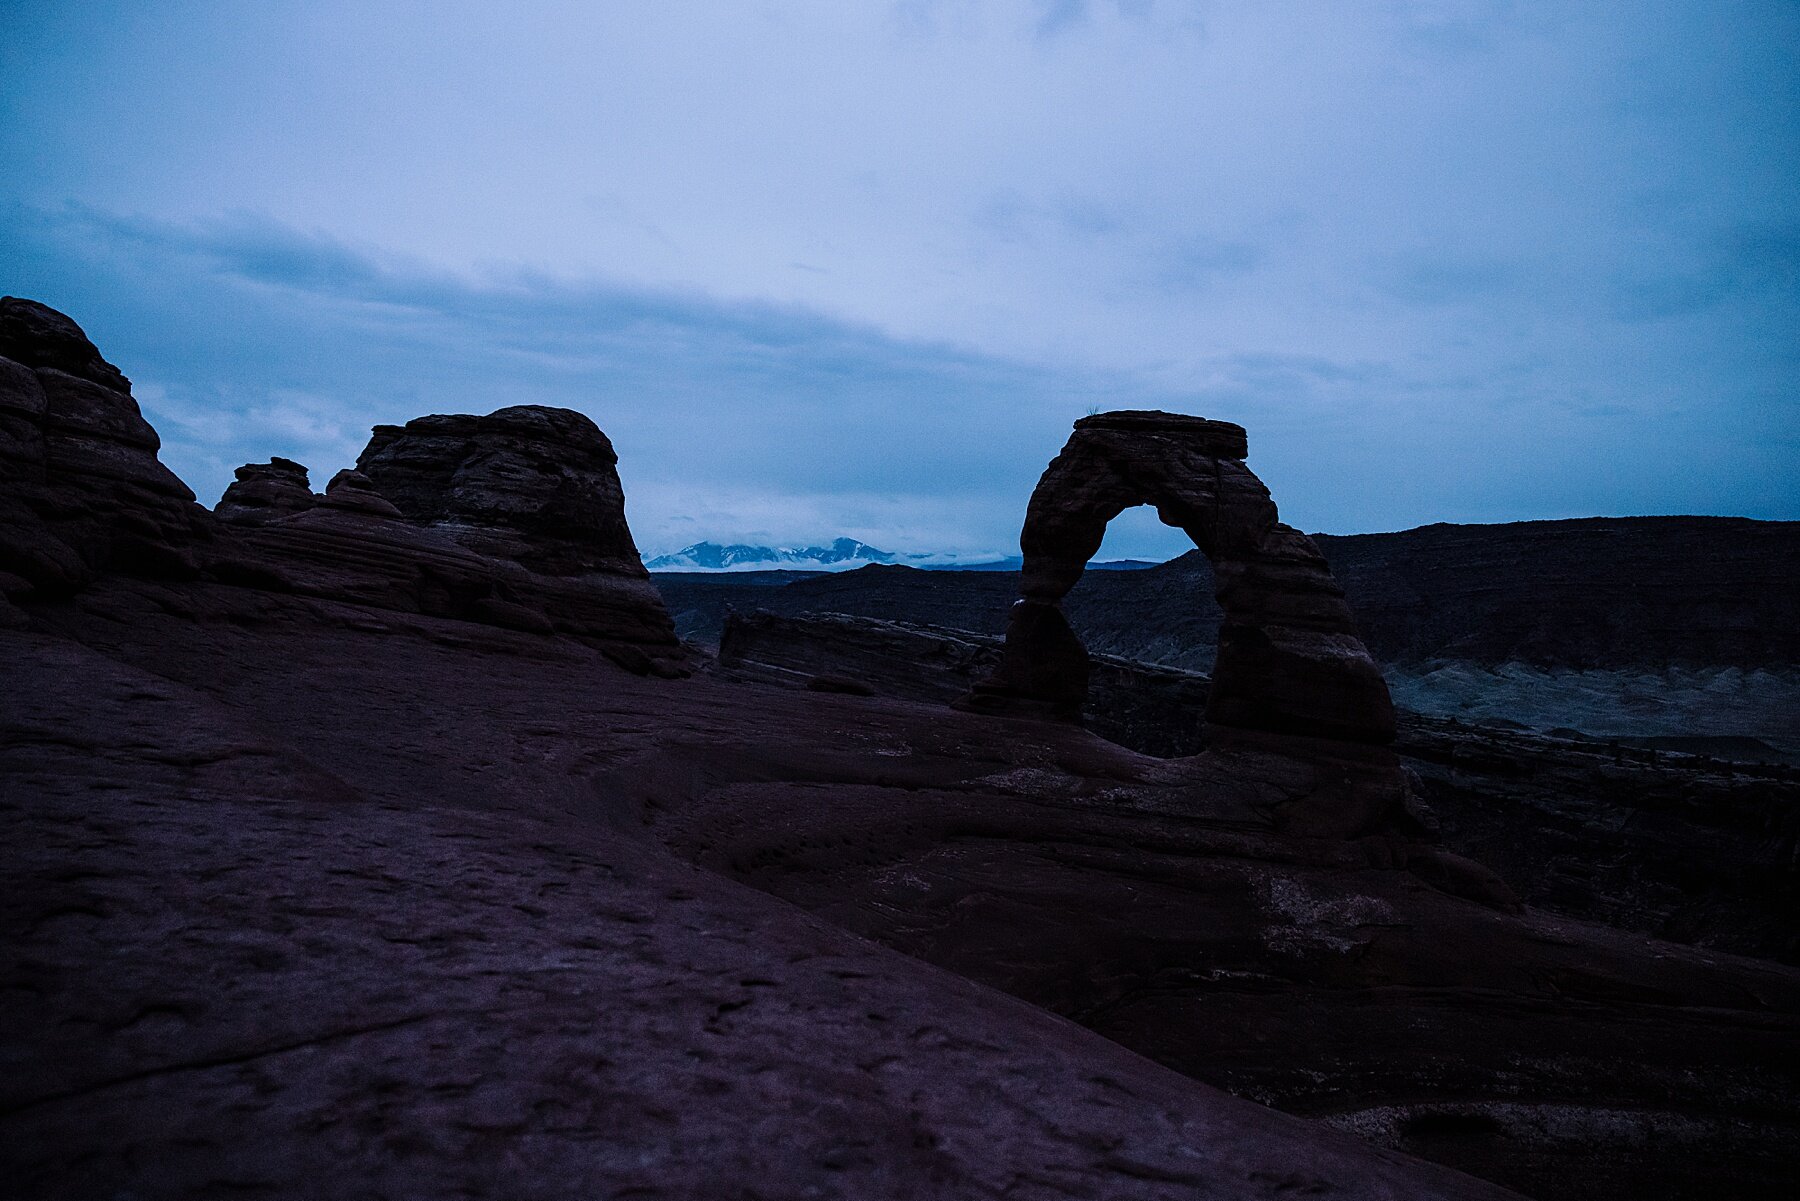 Sunrise Elopement at Arches National Park | Delicate Arch | Moab